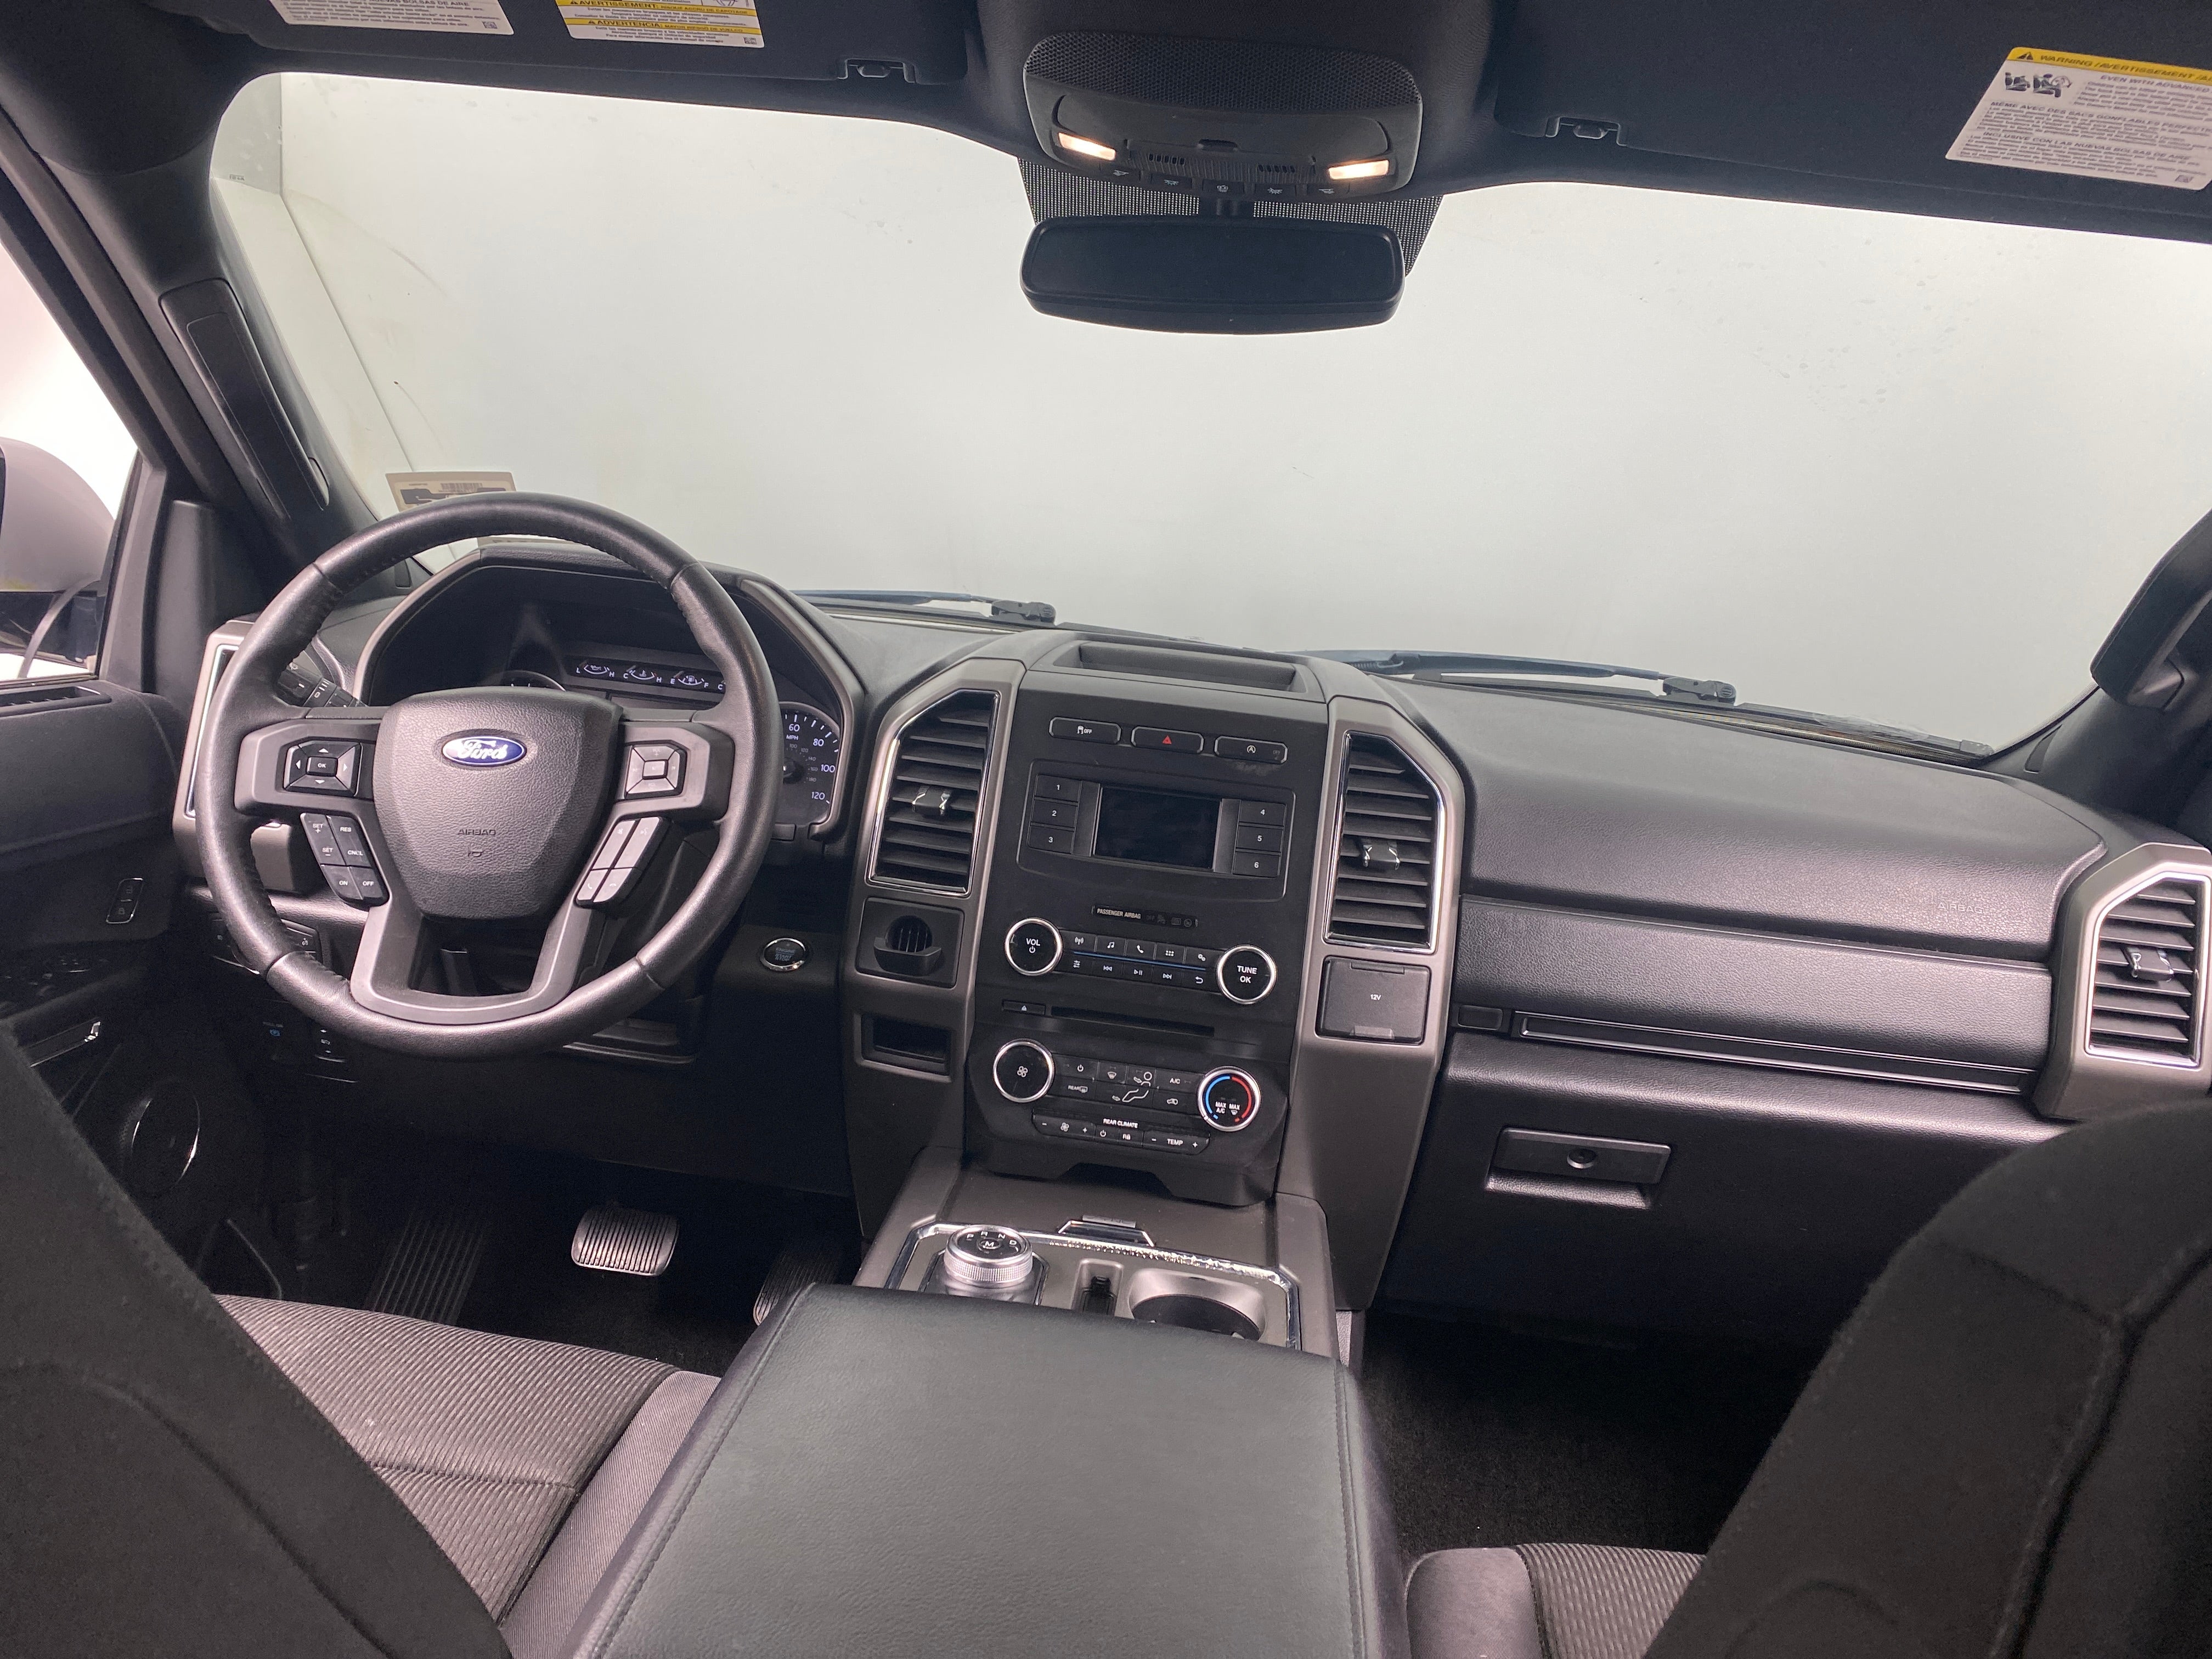 2018 Ford Expedition XLT 3